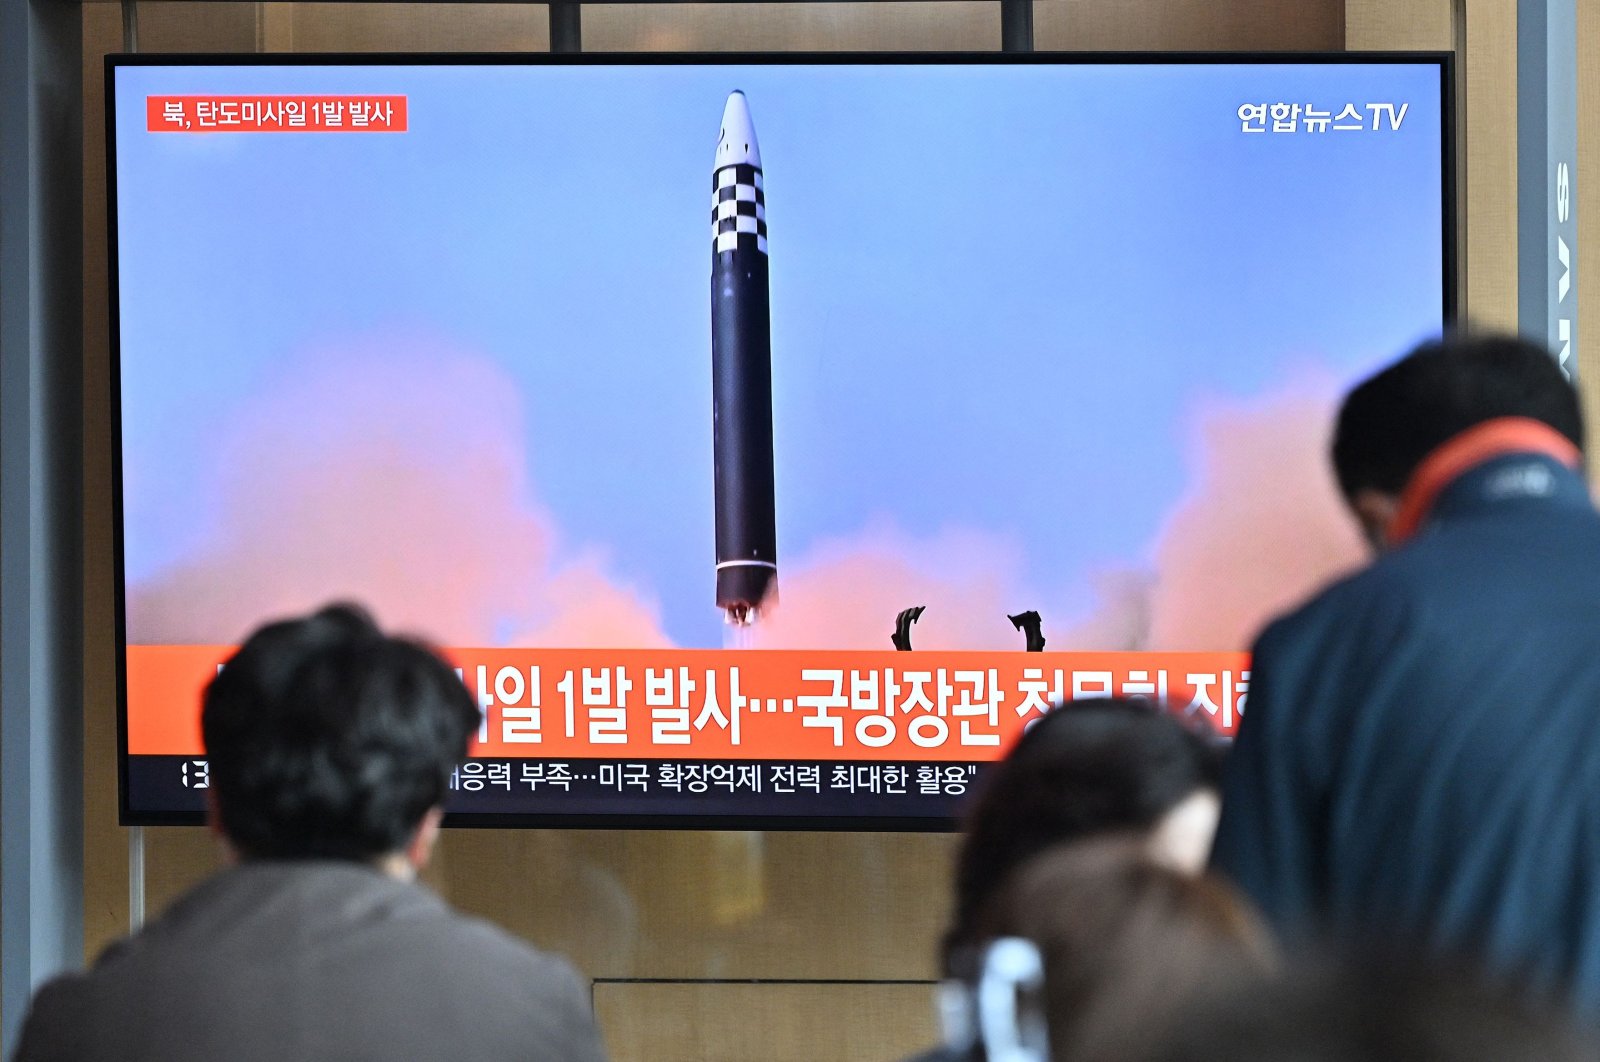 People watch a television screen showing a news broadcast with file footage of a North Korean missile test at a railway station in Seoul, South Korea, May 4, 2022. (AFP Photo)